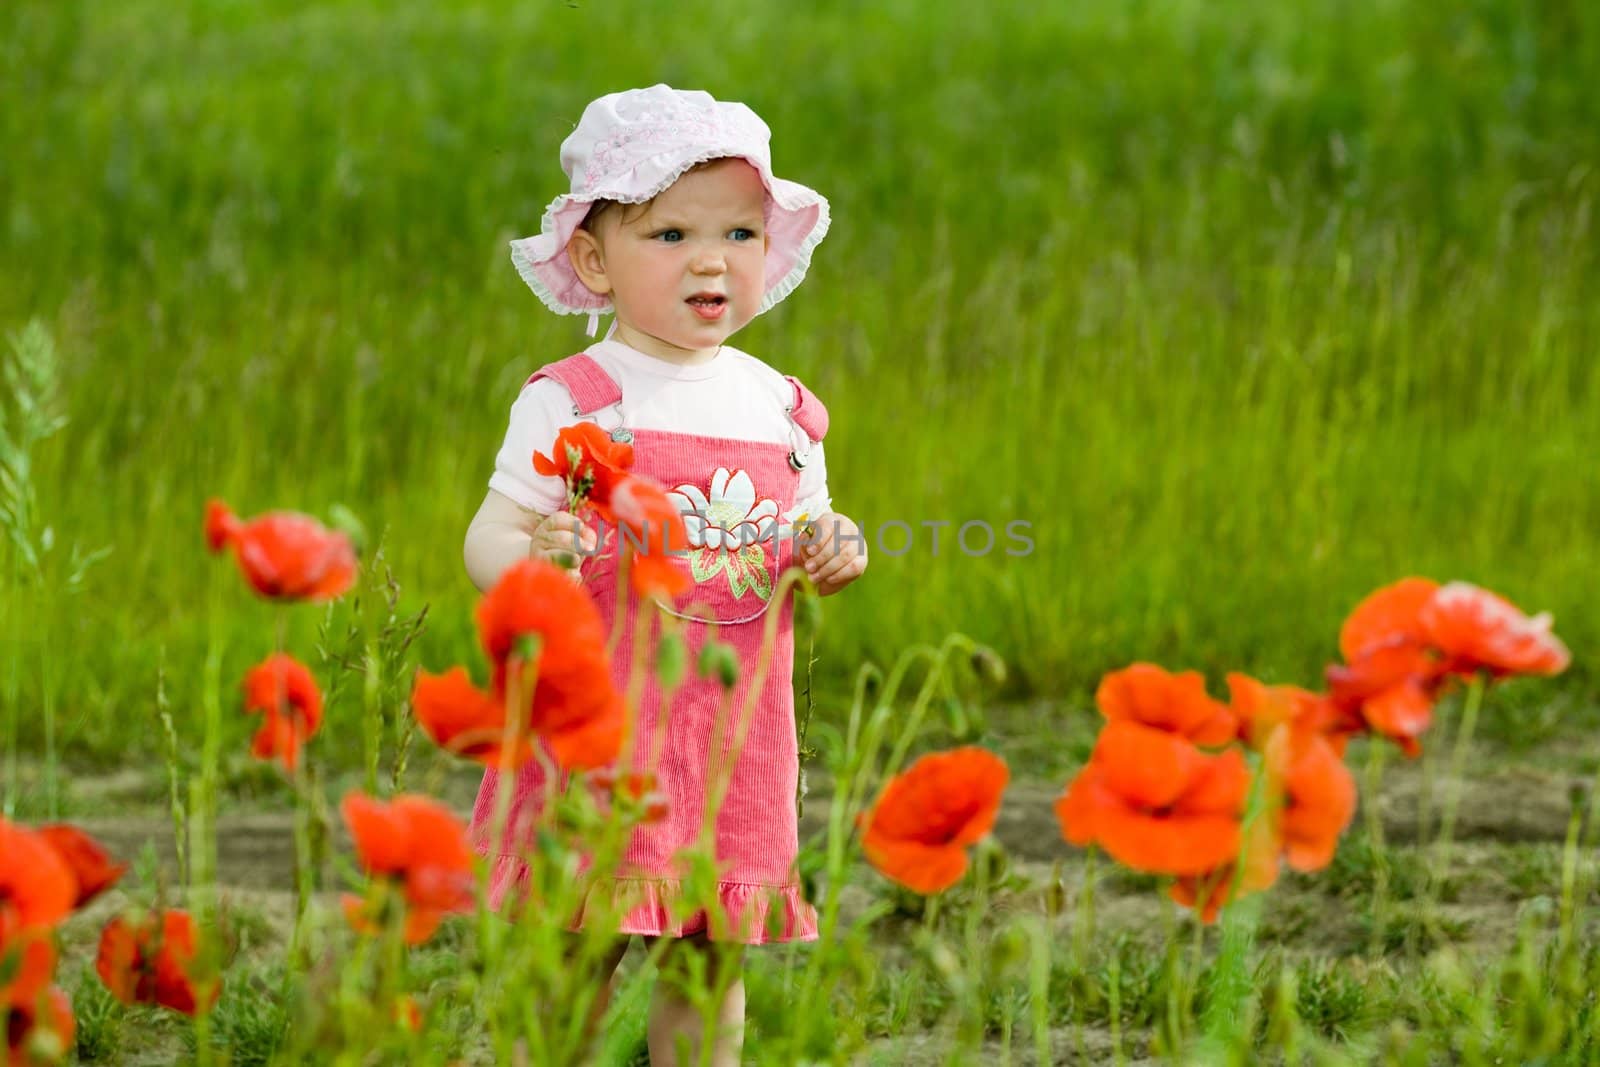 Baby-girl with red flower by velkol